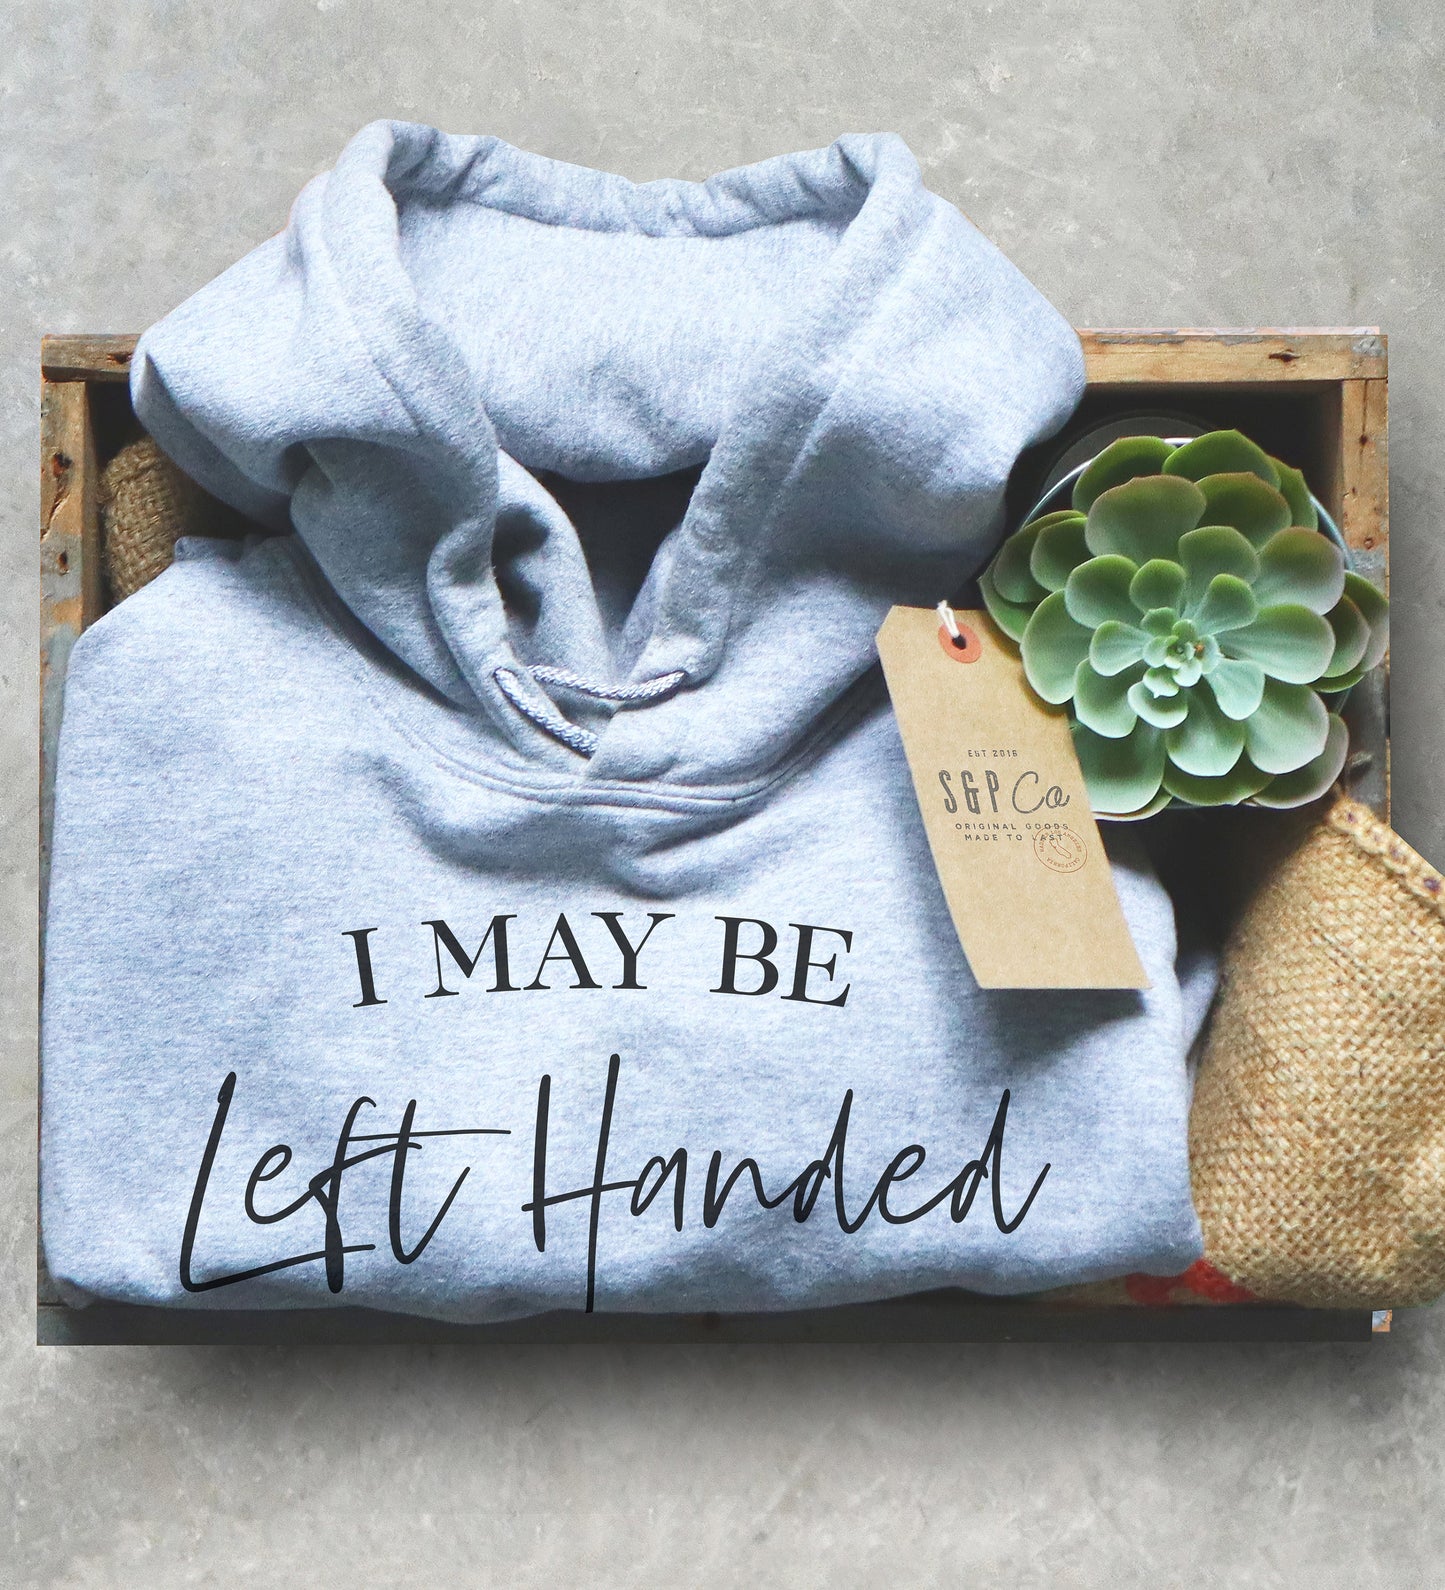 I May Be Left Handed But I’m Always Right Unisex Hoodie - Lefty Gift, Left Handed Shirt, Left Hander Shirt, Left Handed Gifts, Smart Shirt